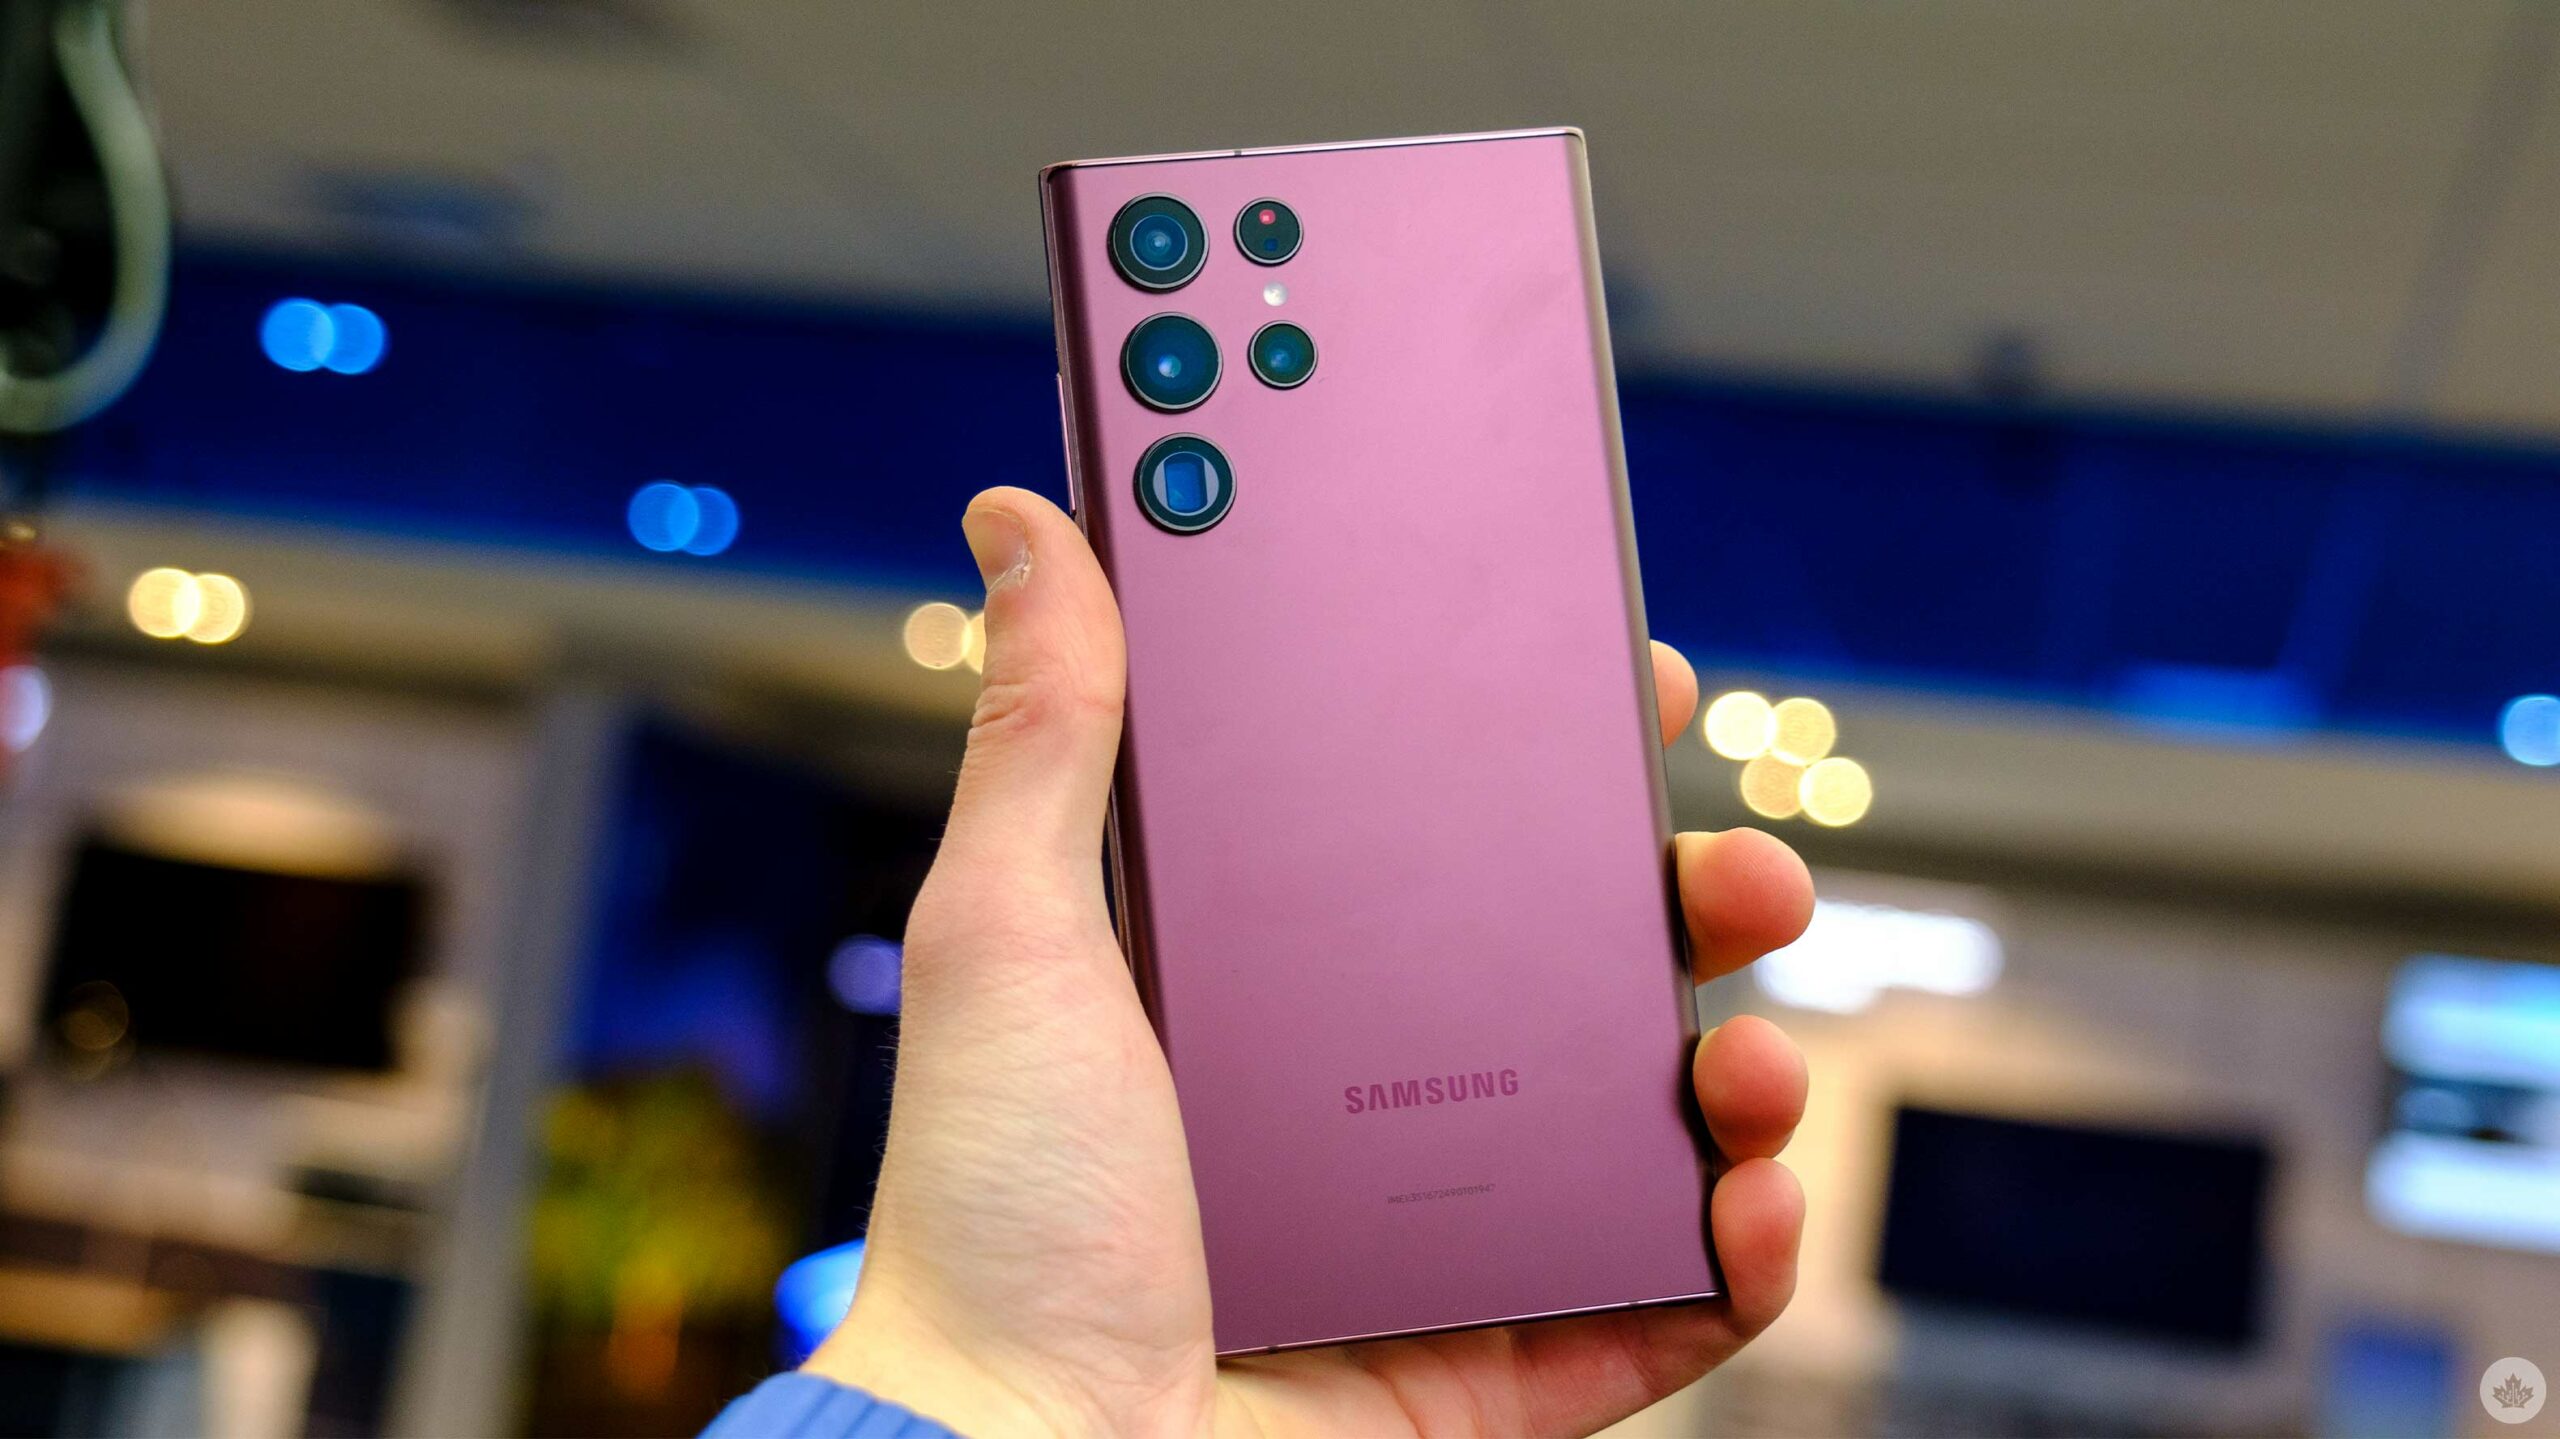 Samsung Galaxy S23 Ultra hands-on: A 200MP camera is the biggest